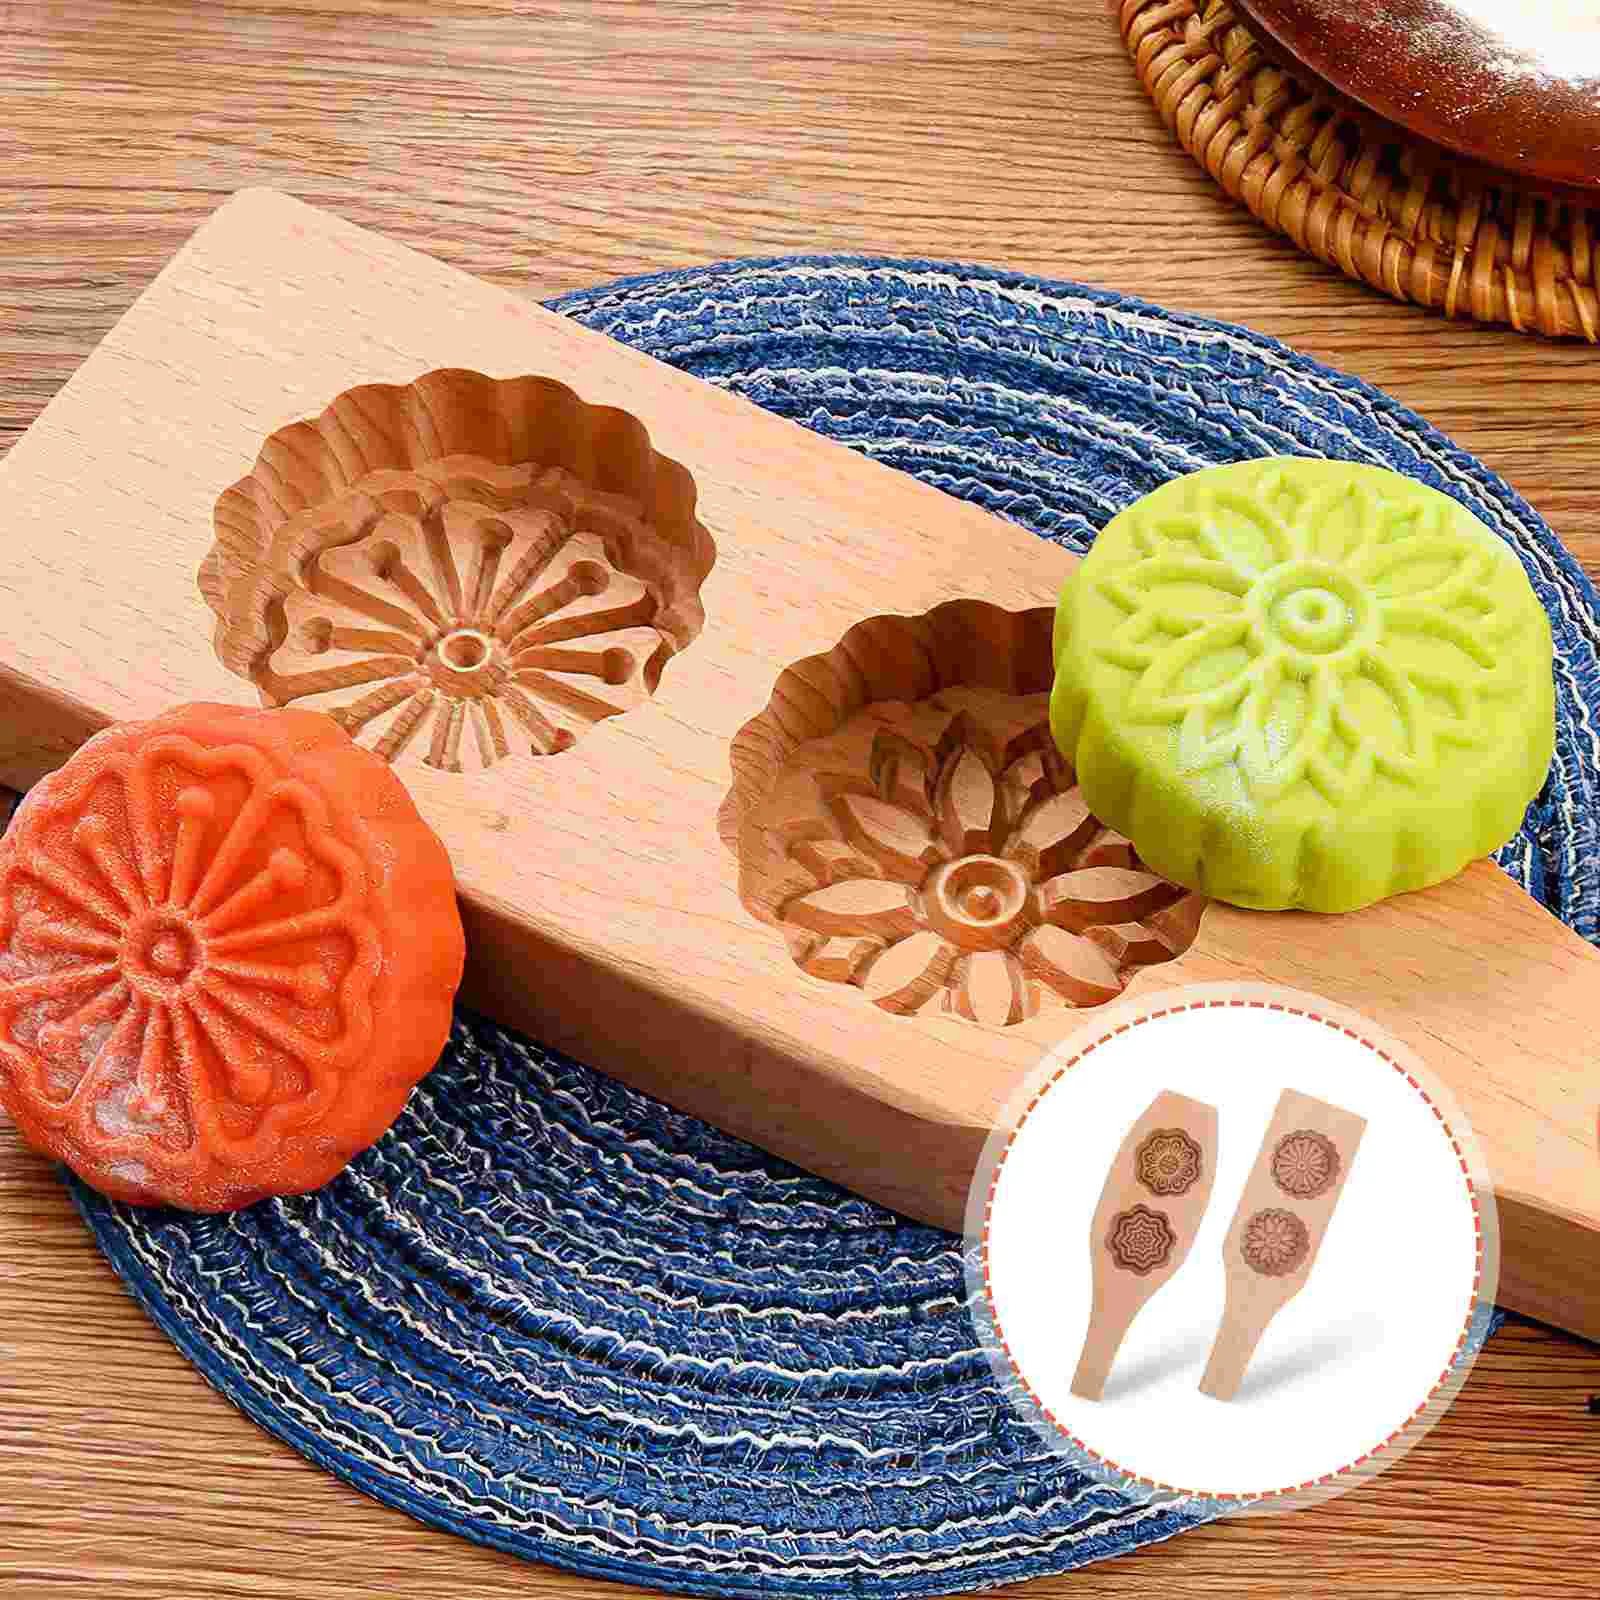 

2 Pcs Make Some Molds Moon Cakes Green Bean DIY Handle Mooncake Chocolate Tools Daily Use Cookie Tray Household Kitchen